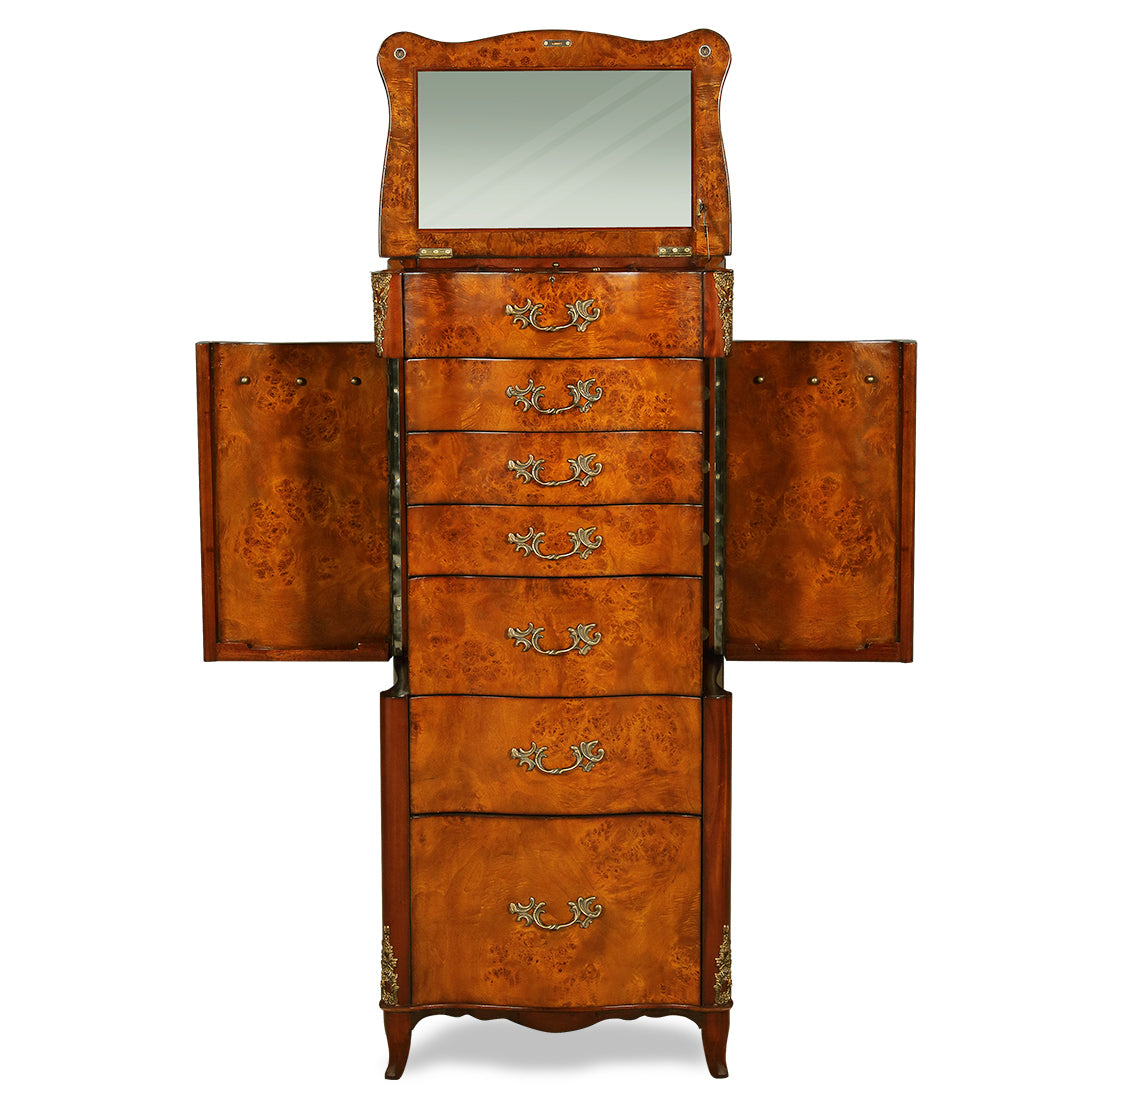 Chest Classical furniture jansen brand, French Jewelry Chest Furniture HK, Jansen Classical Furniture HK